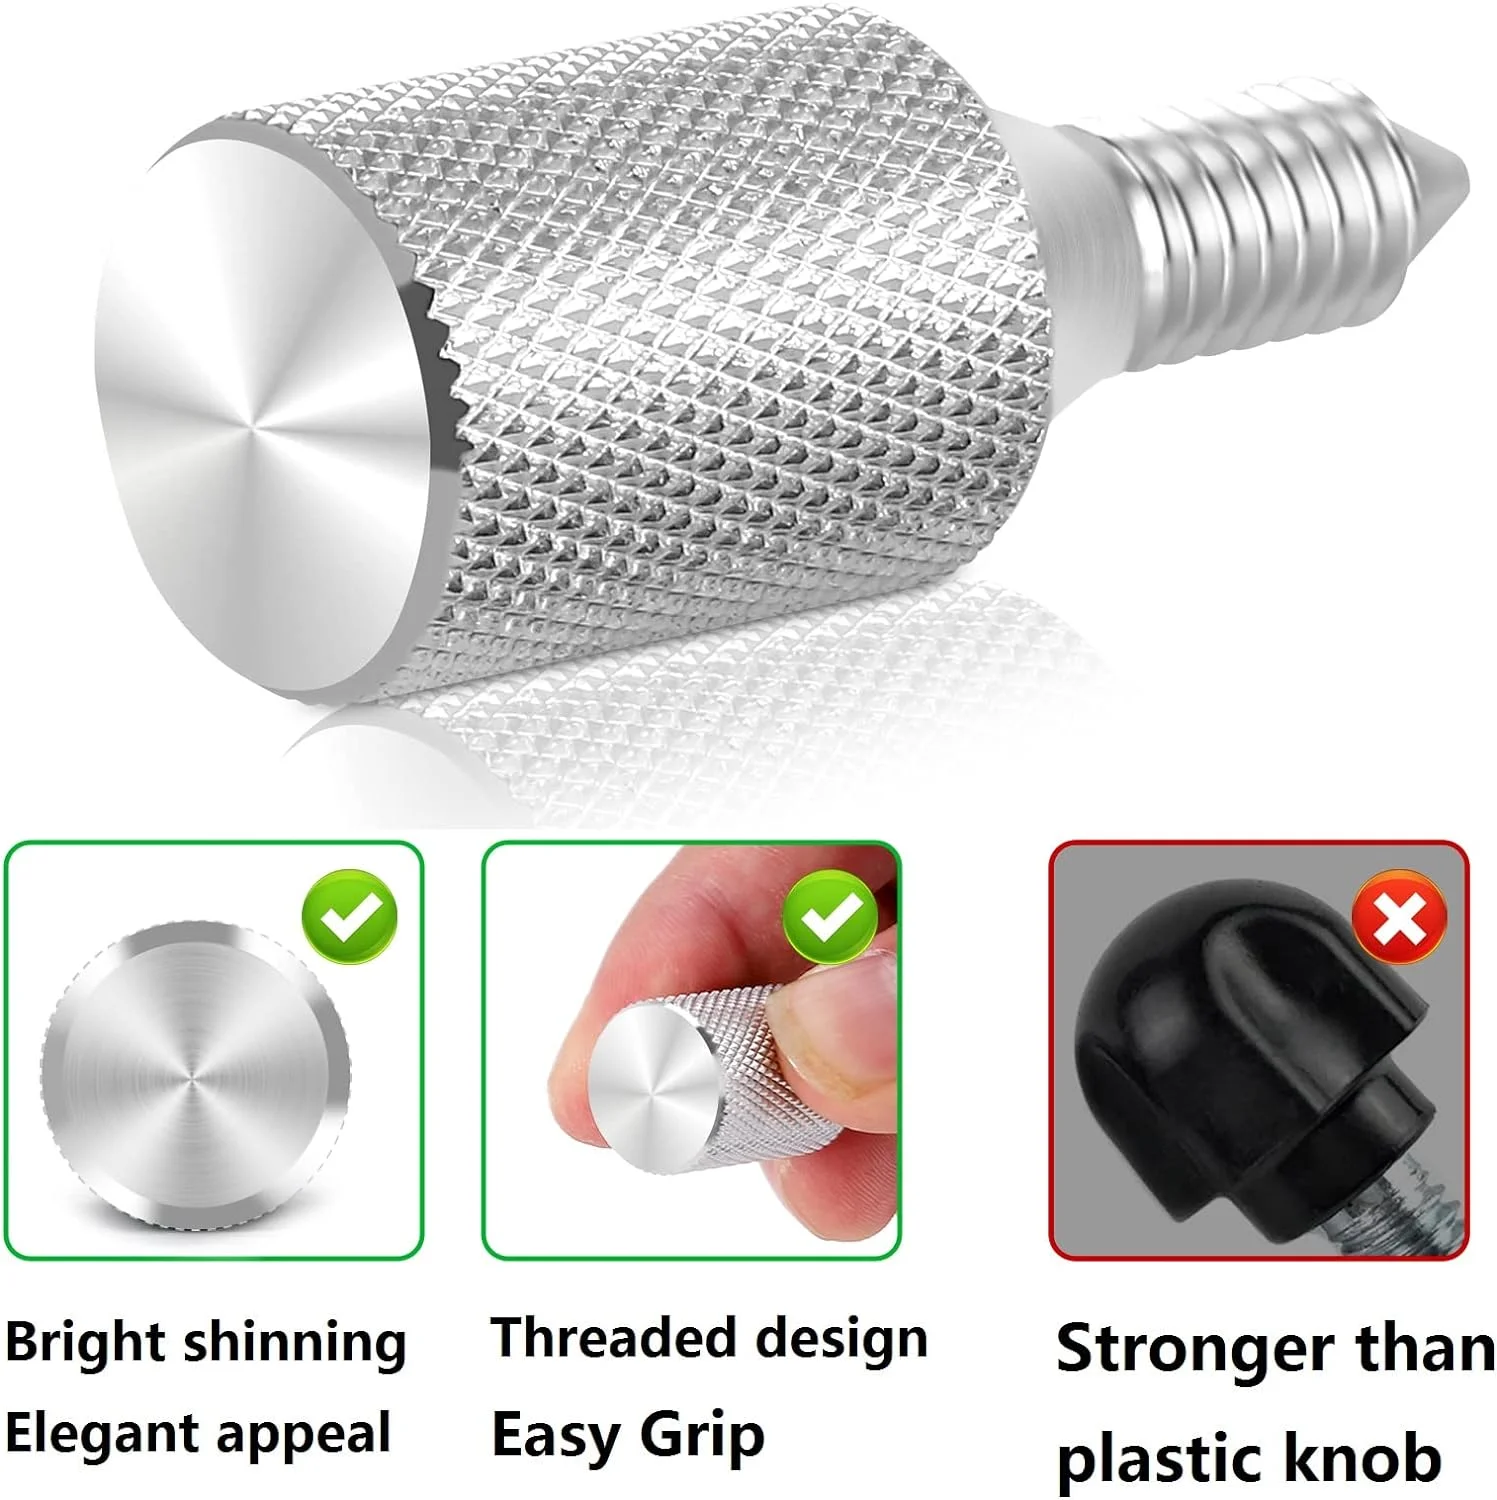 Attachment Thumb Screw Review